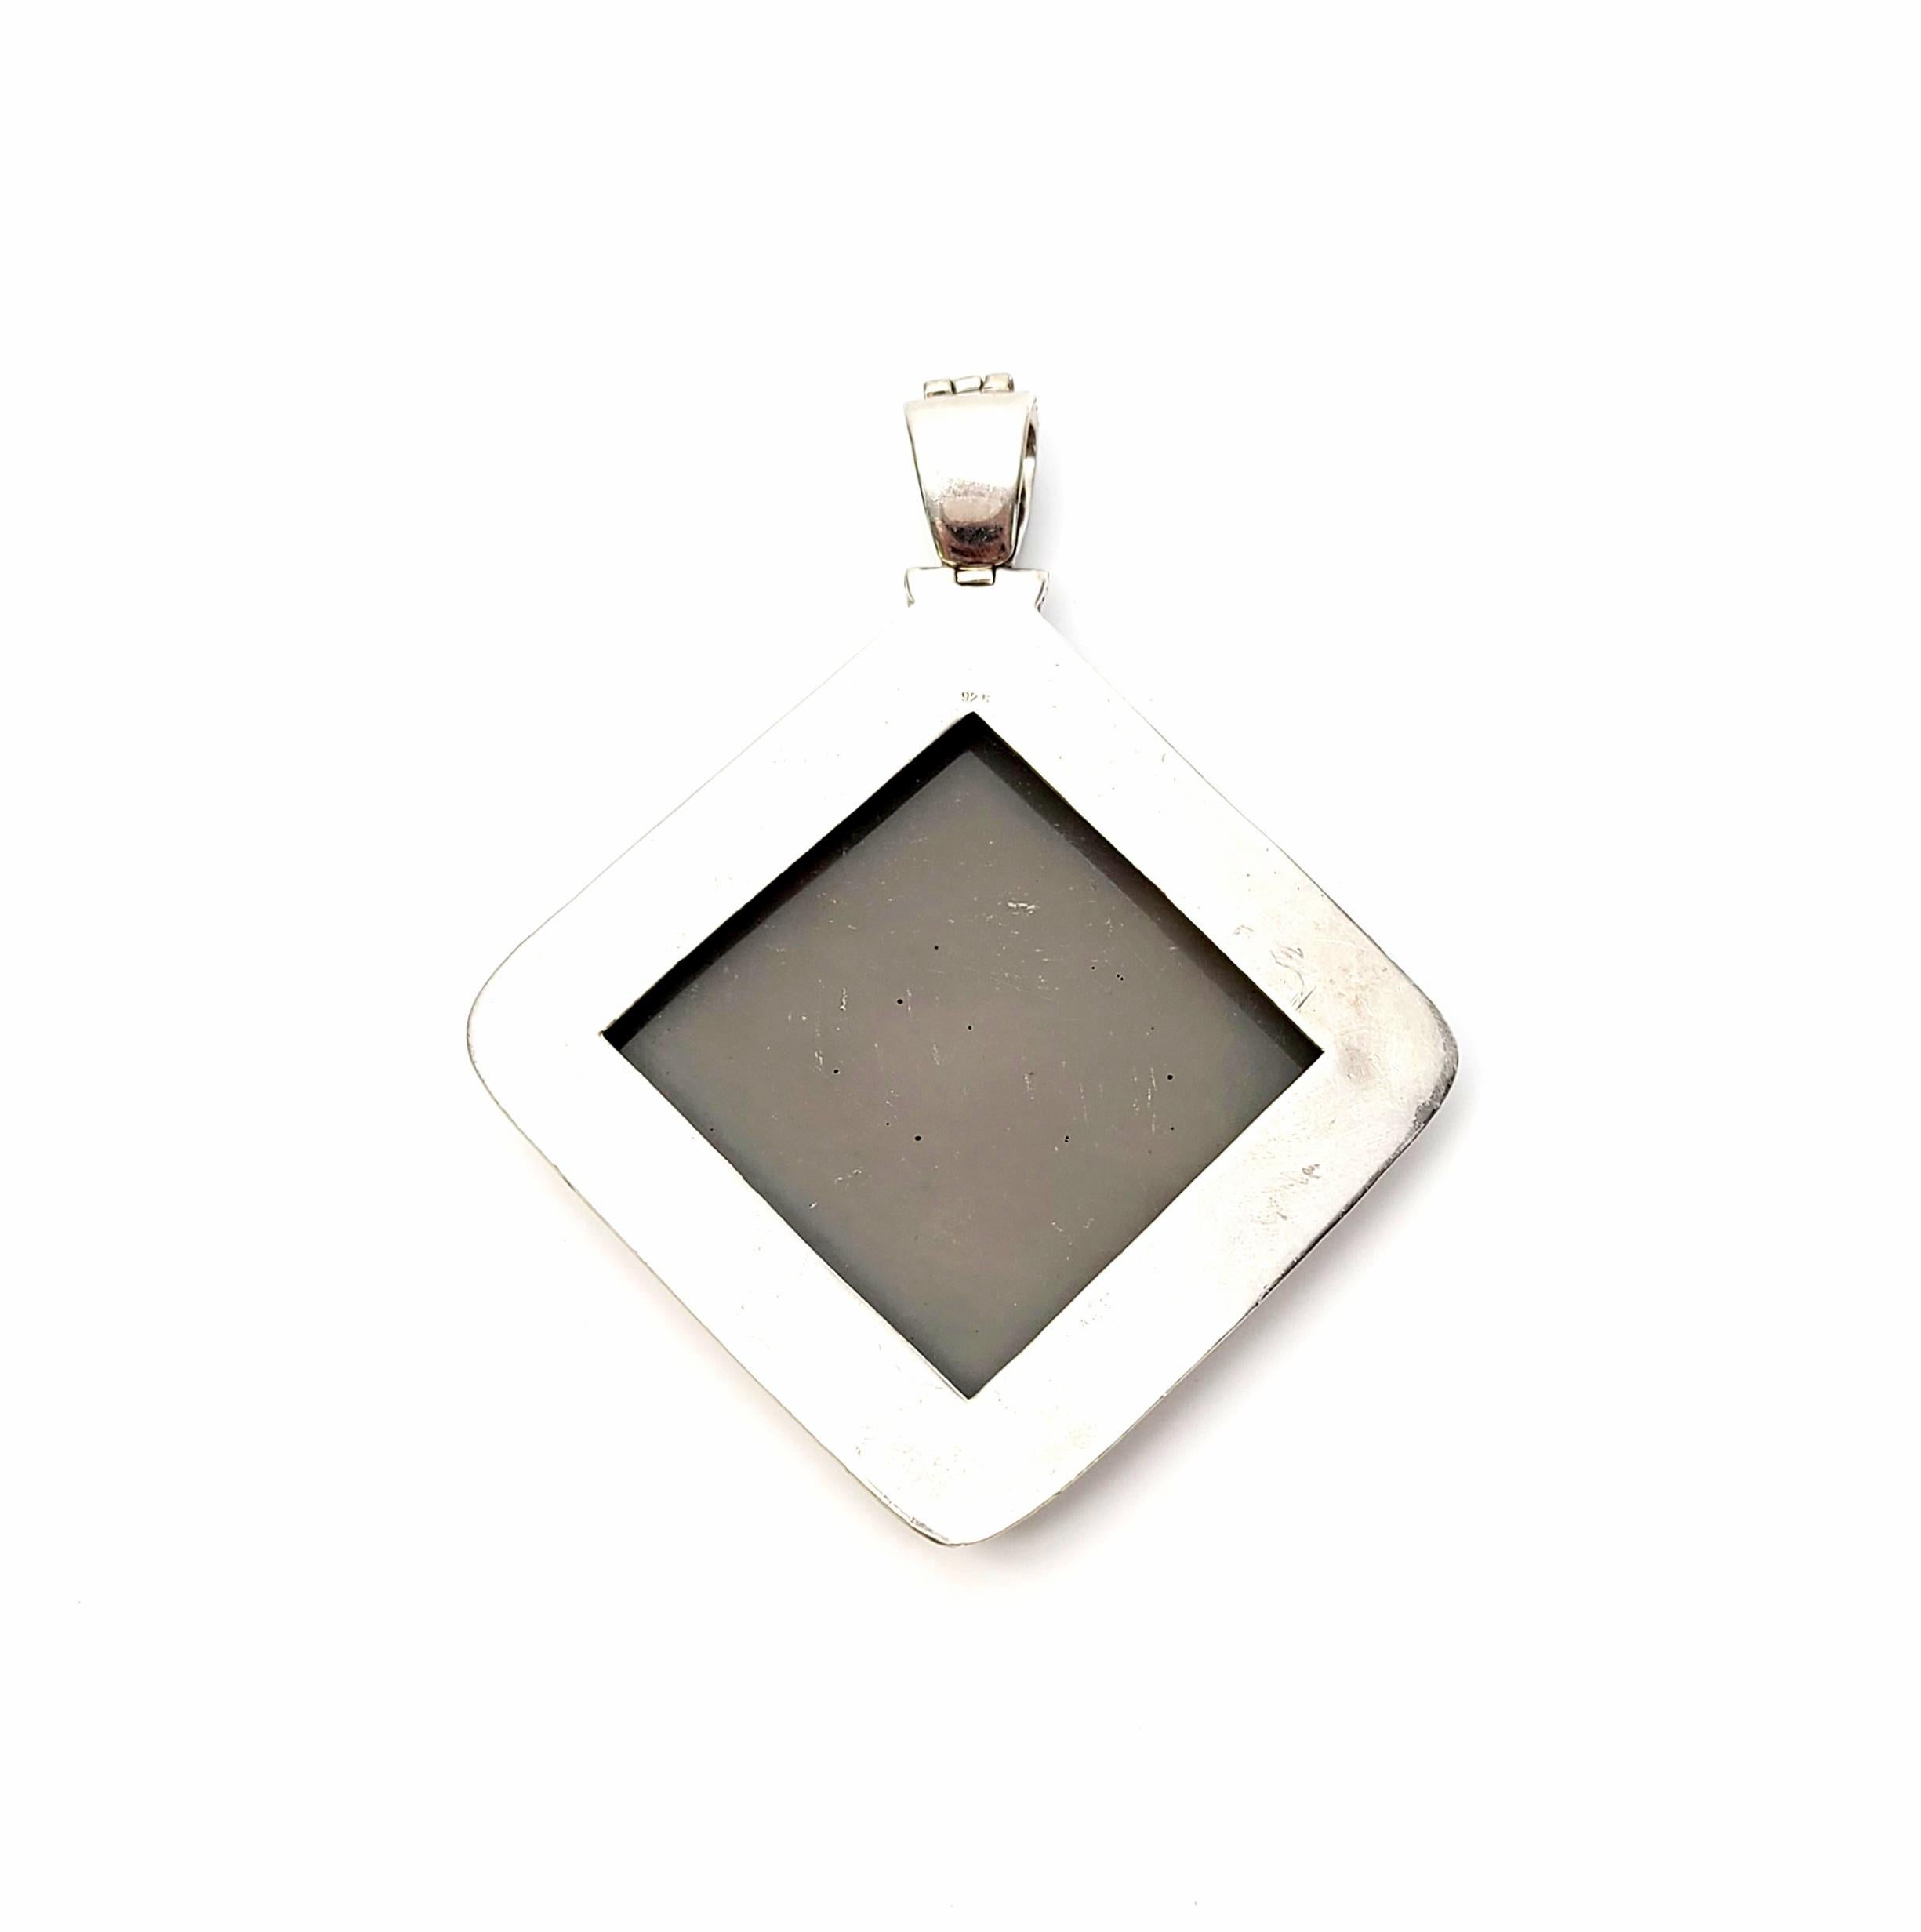 Large sterling silver pendant with copper, silk thread and rhinestone accents.

This unique and large handcrafted artisan piece features a large square sterling silver frame with copper accent edging surrounding a square with applied silk thread,